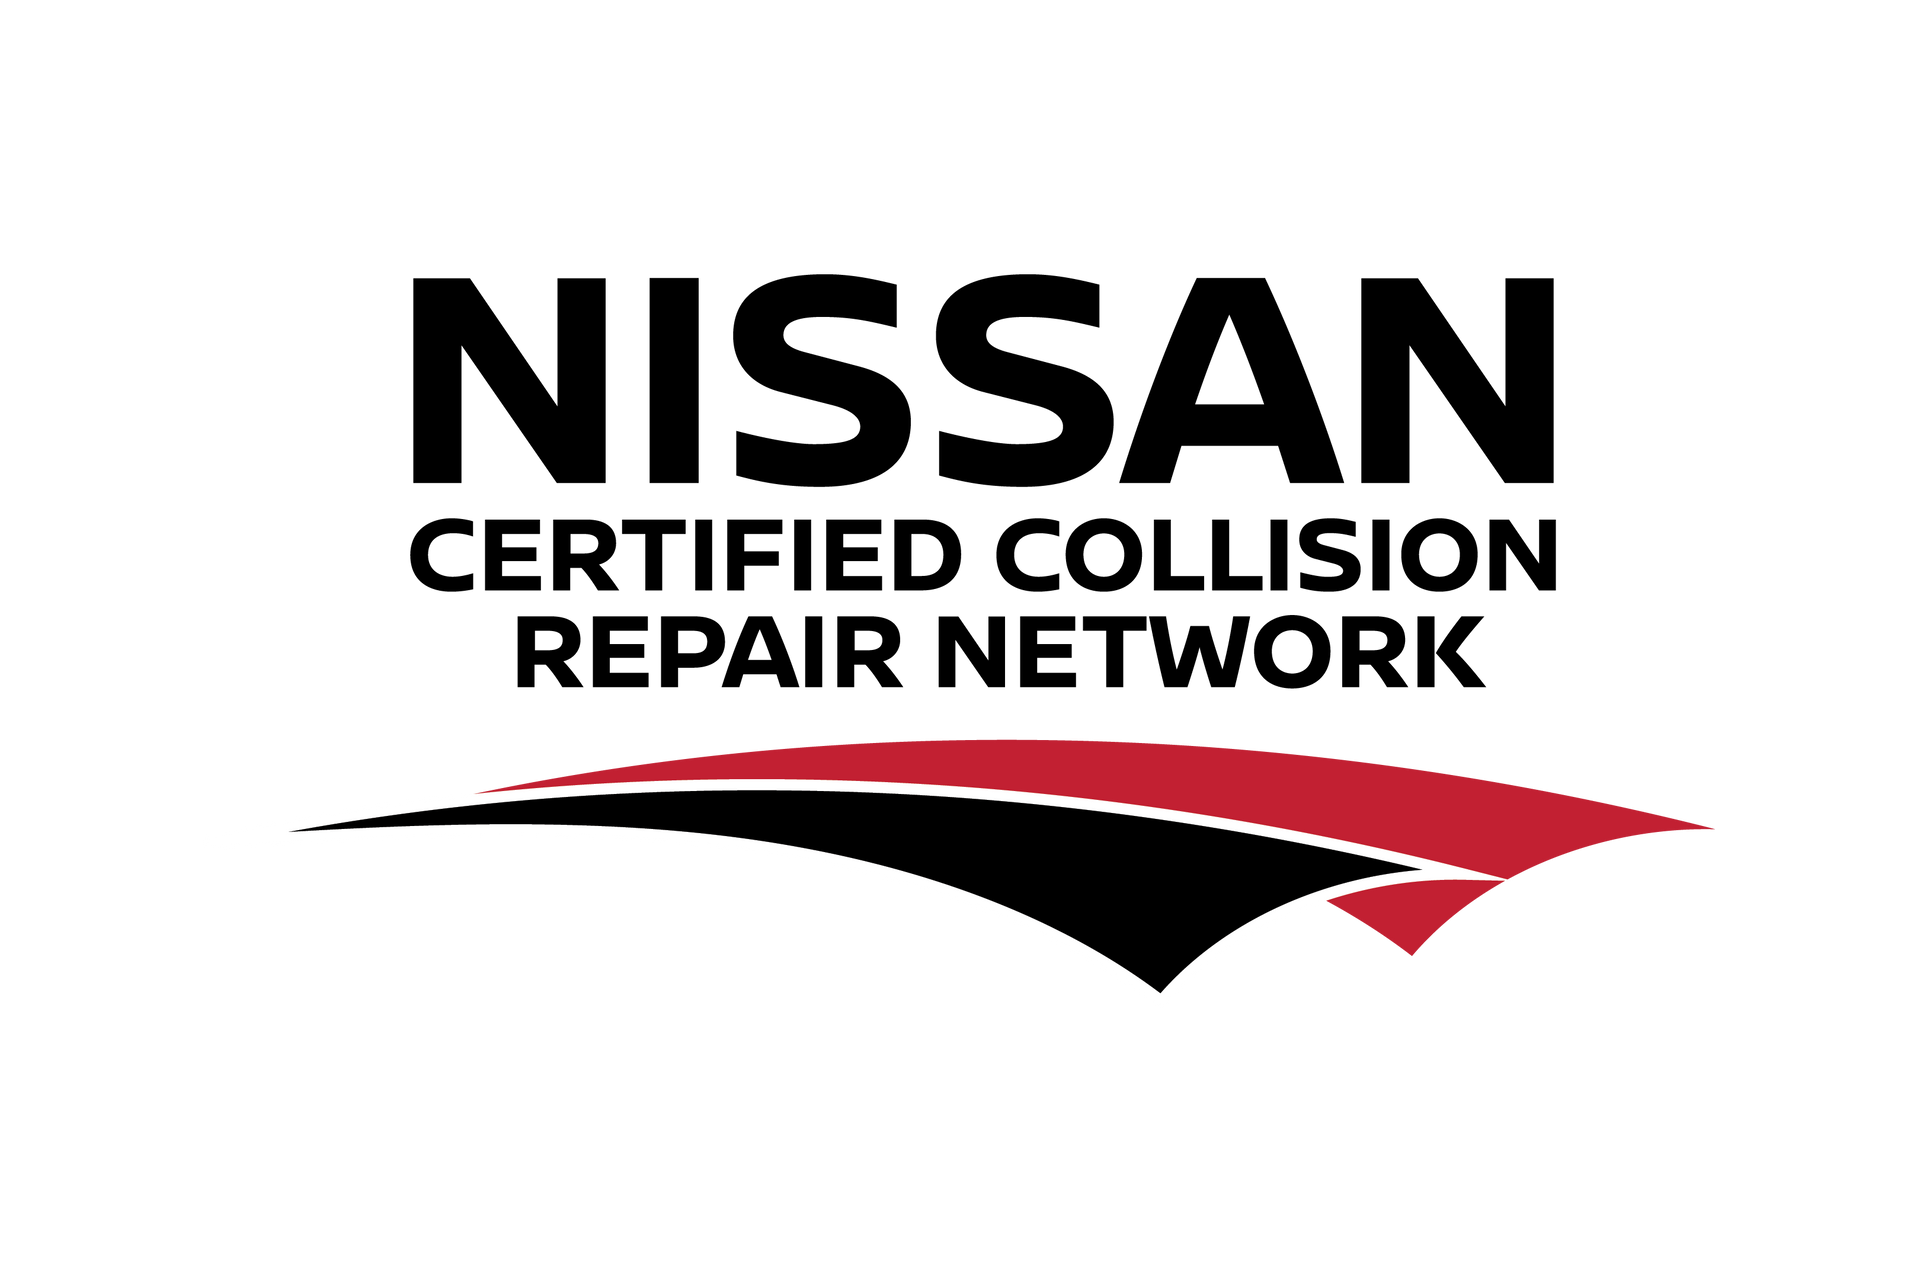 A nissan certified collision repair network logo on a white background.